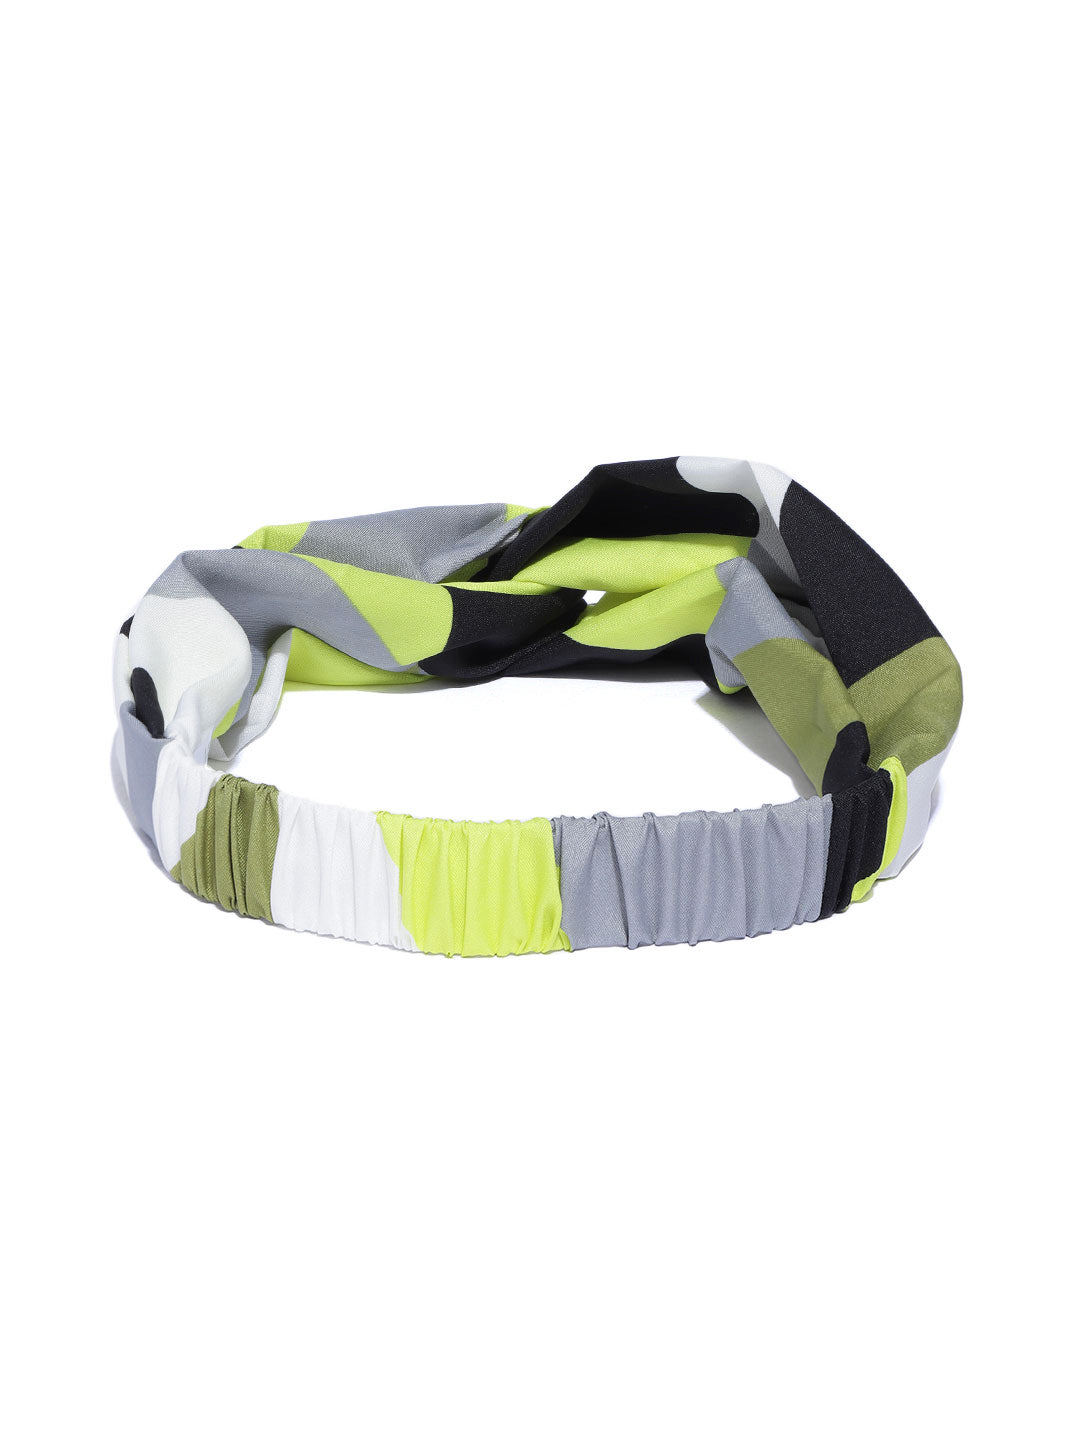 Blueberry lime green and black printed knot hairband